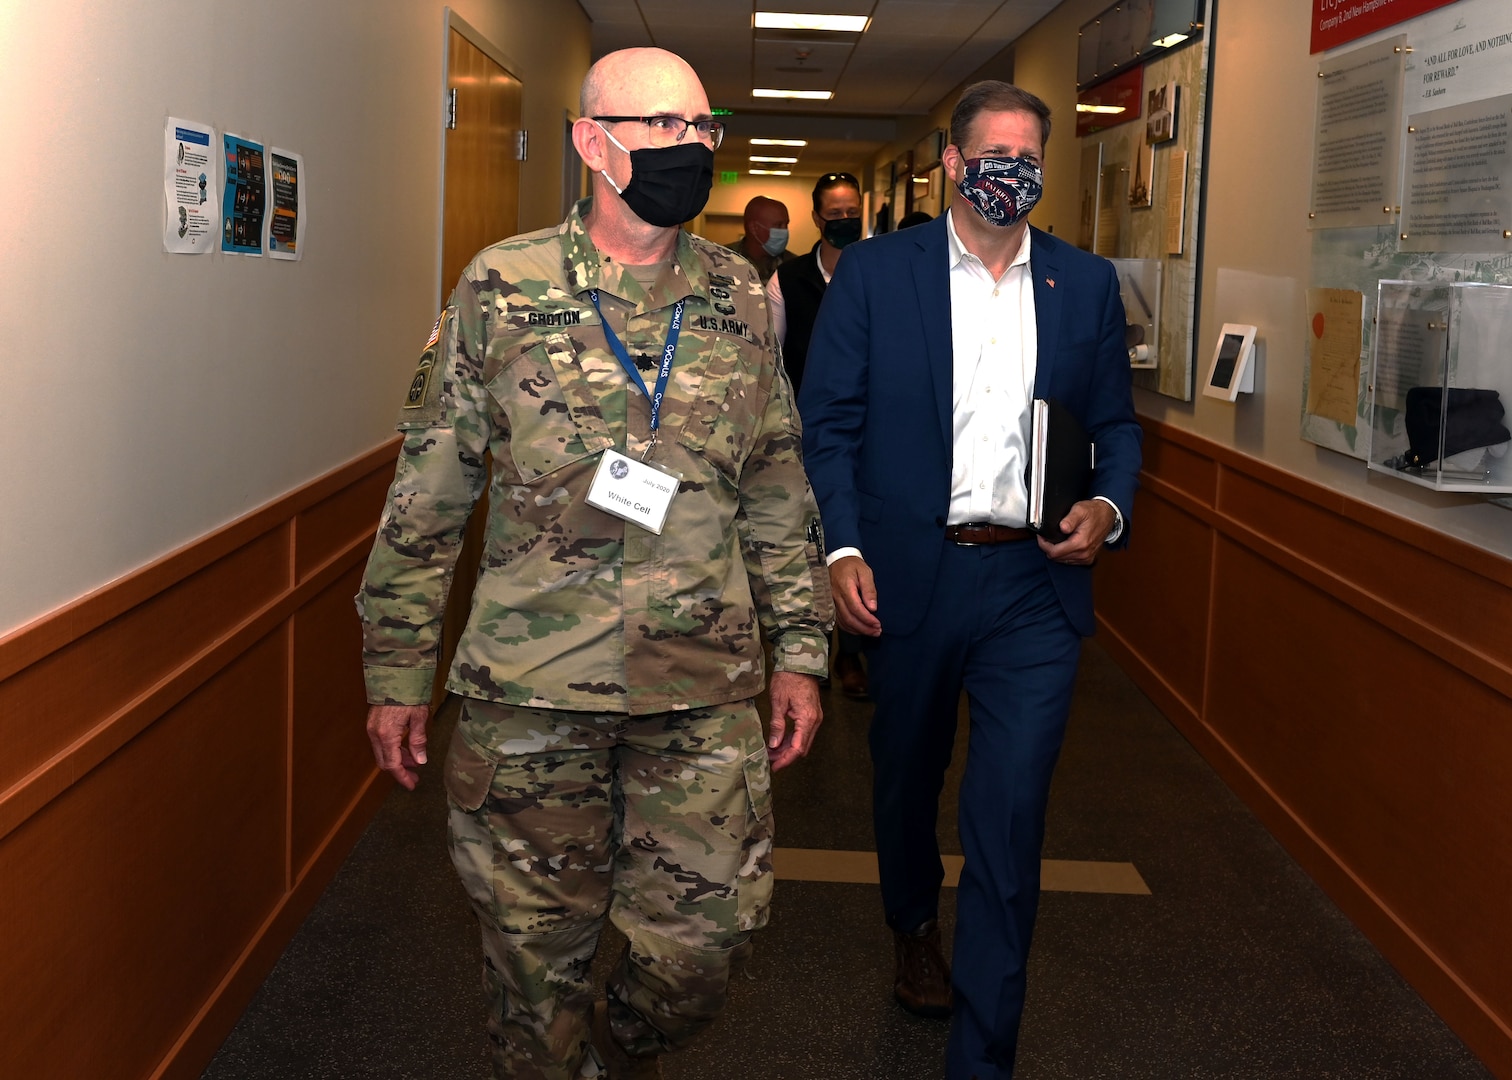 Lt. Col. Woody Groton, exercise director of Cyber Yankee 2020, leads N.H. Gov. Chris Sununu on a tour of the event on July 31, 2020, at the Edward Cross Training Center in Pembroke, N.H.